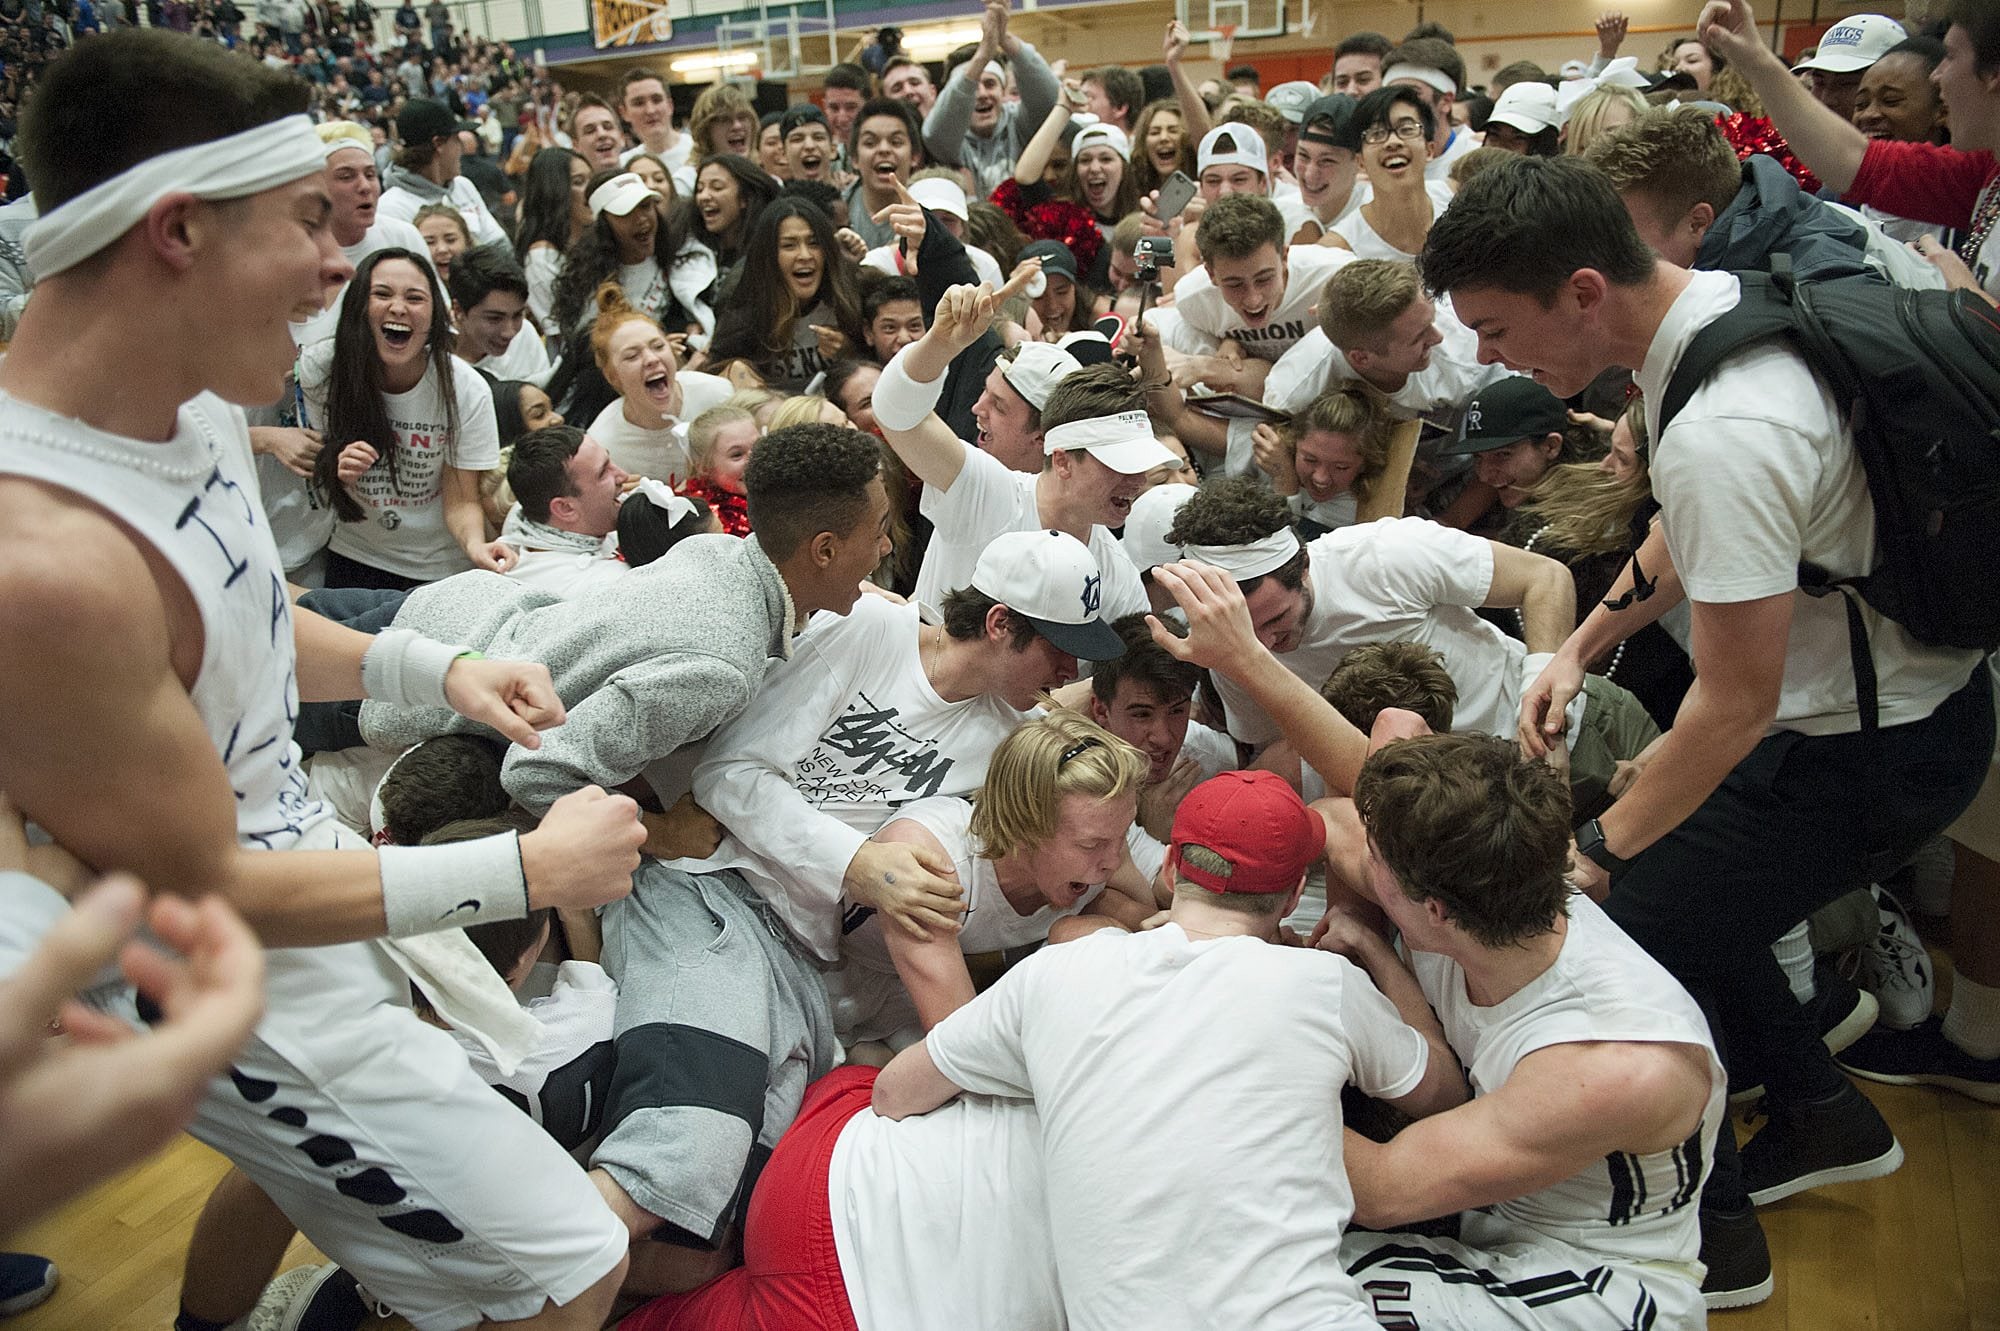 Union fans rush the court after a last-second shot helped the team win against Bellarmine on Friday night, Feb. 26, 2016 at Battle Ground High School.